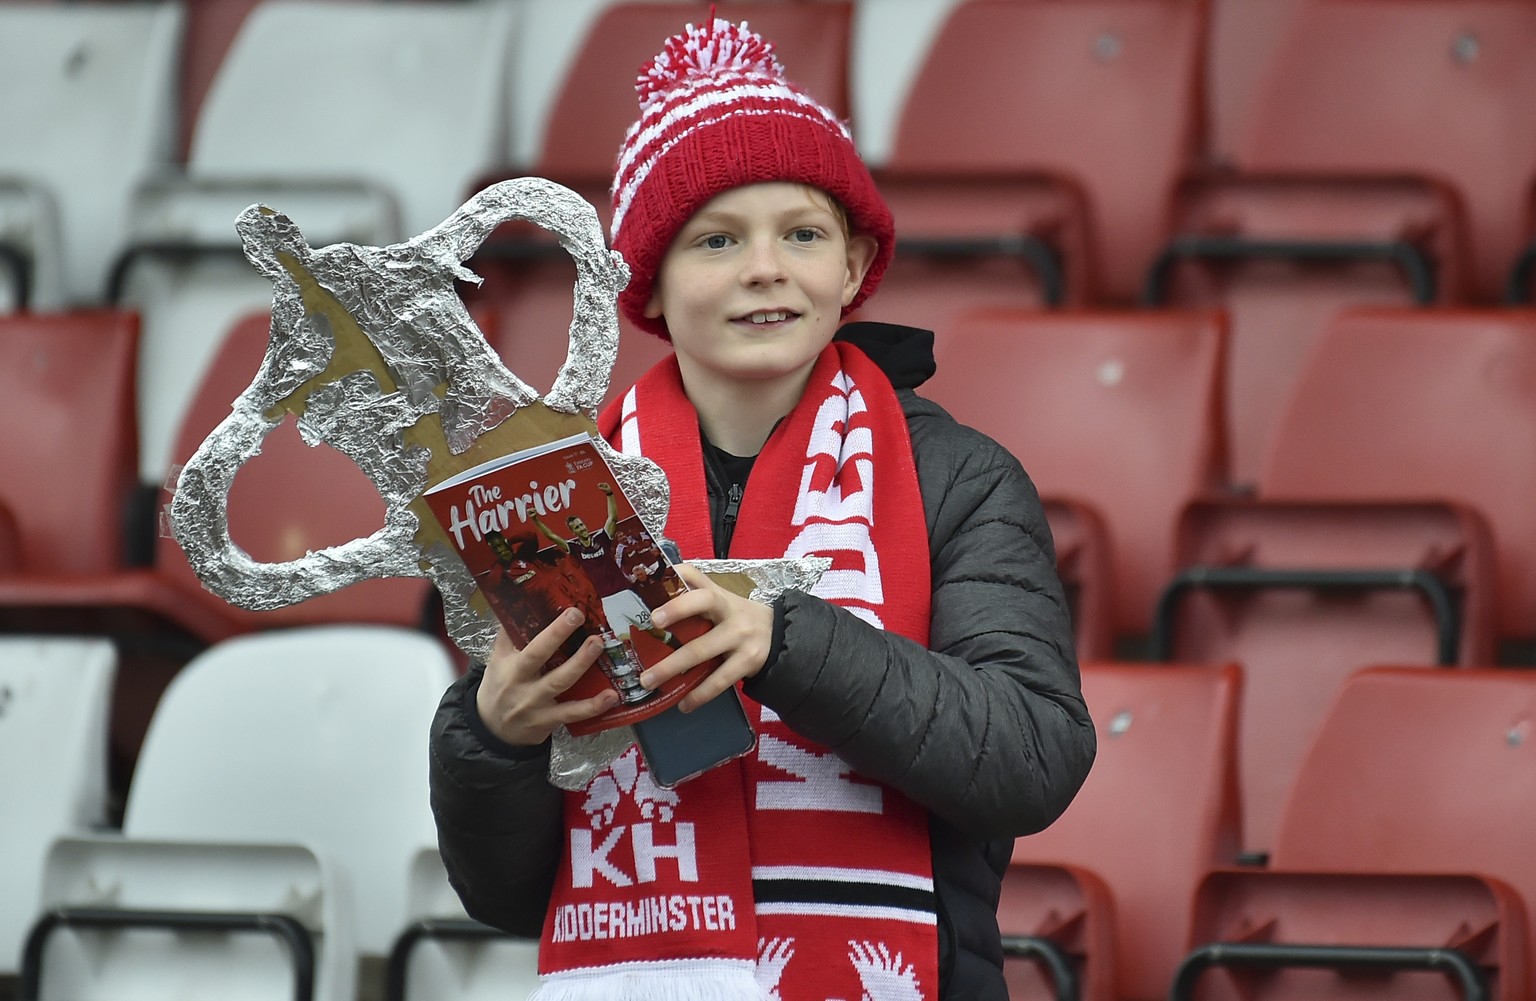 A young Kidderminster supporter holds a replica of the FA Cup before the English FA Cup fourth round soccer match between Kidderminster Harriers and West Ham United at Aggborough Stadium, Kidderminste ...